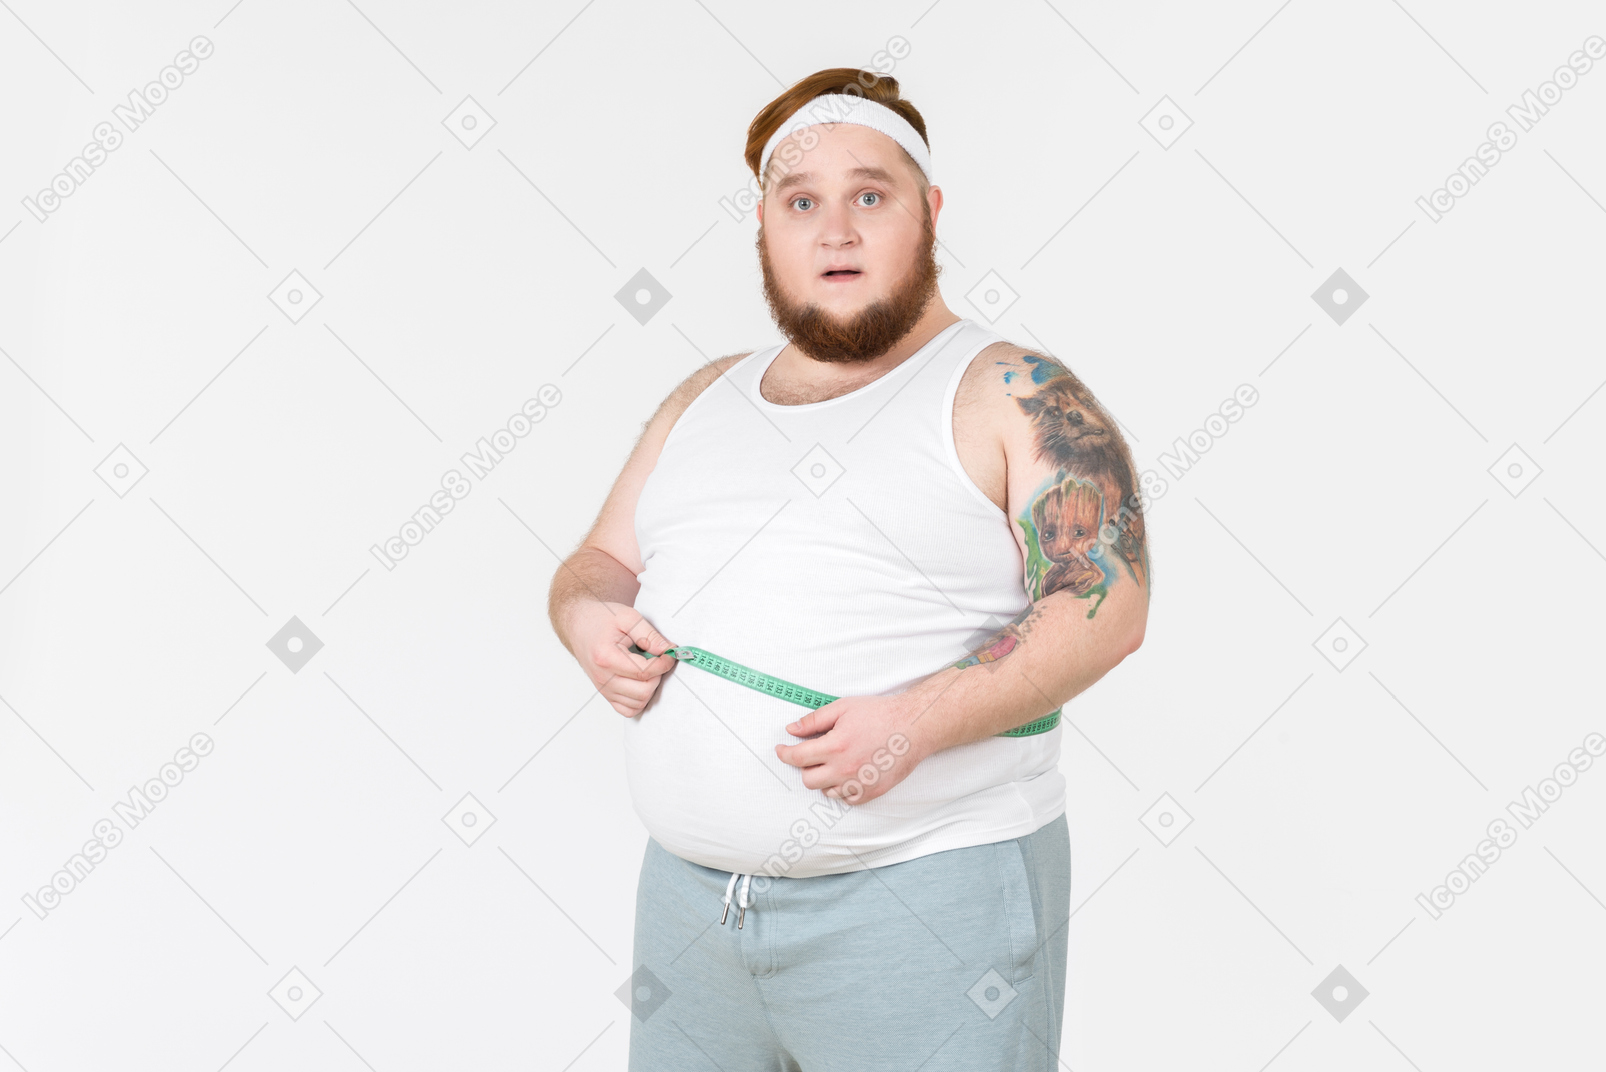 Big guy measuring his waist with cloth ruler